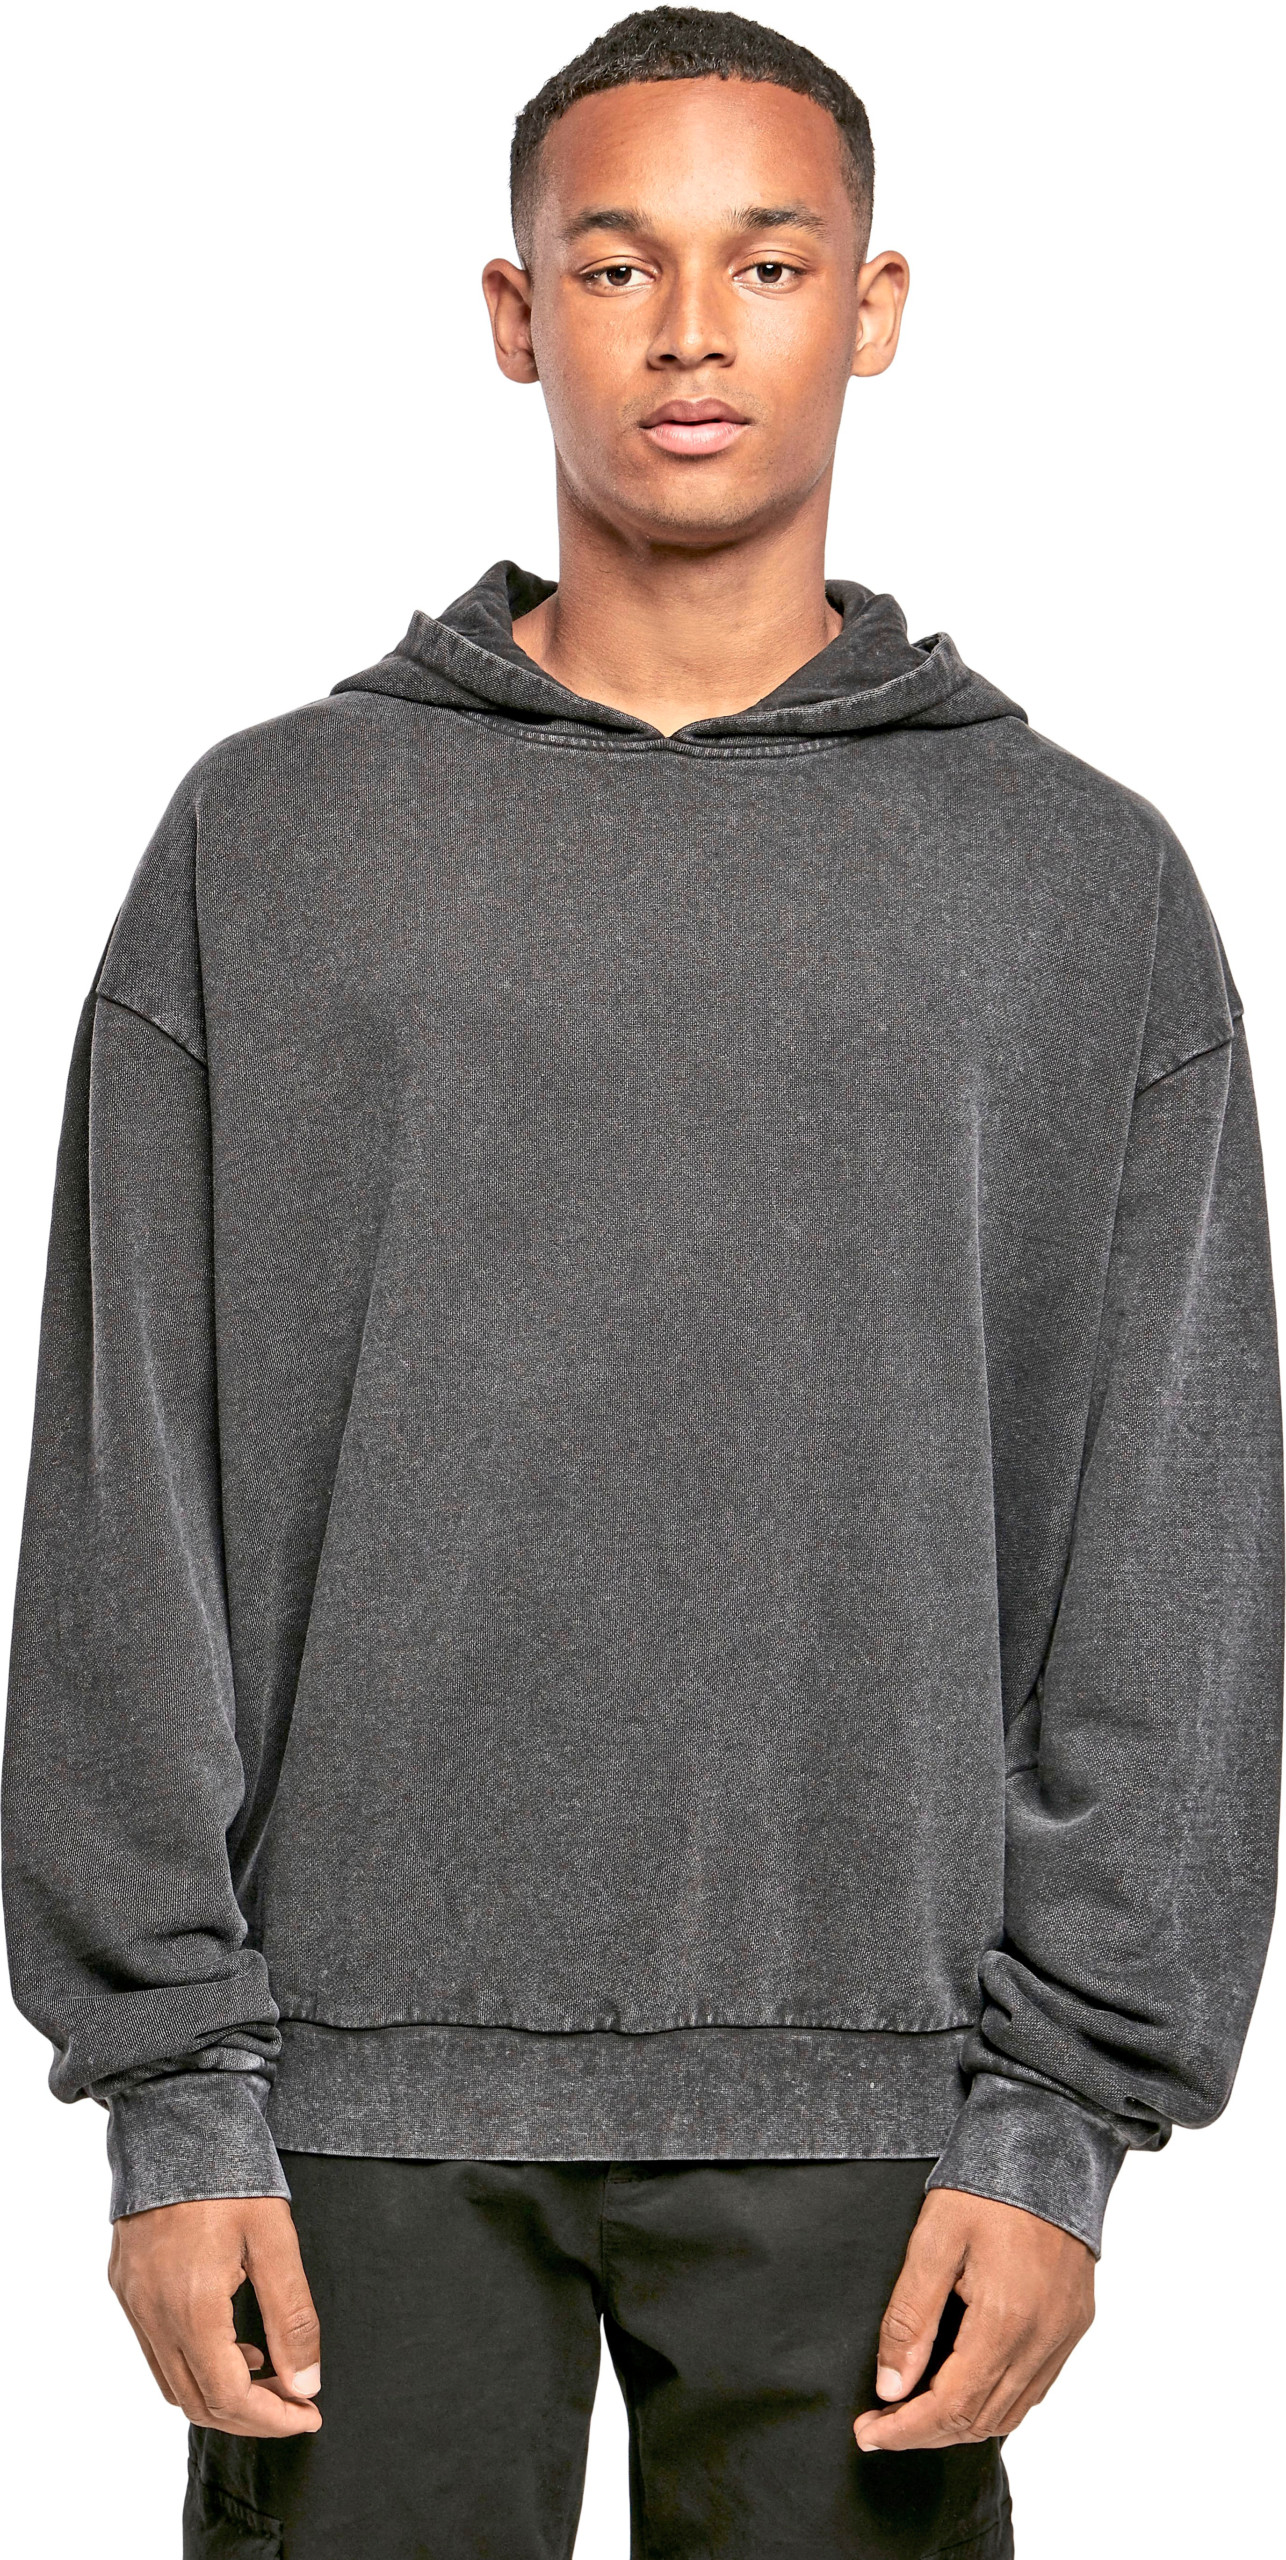 Hoodys - Build Your Brand - Acid Washed Oversize Hoody - BY191